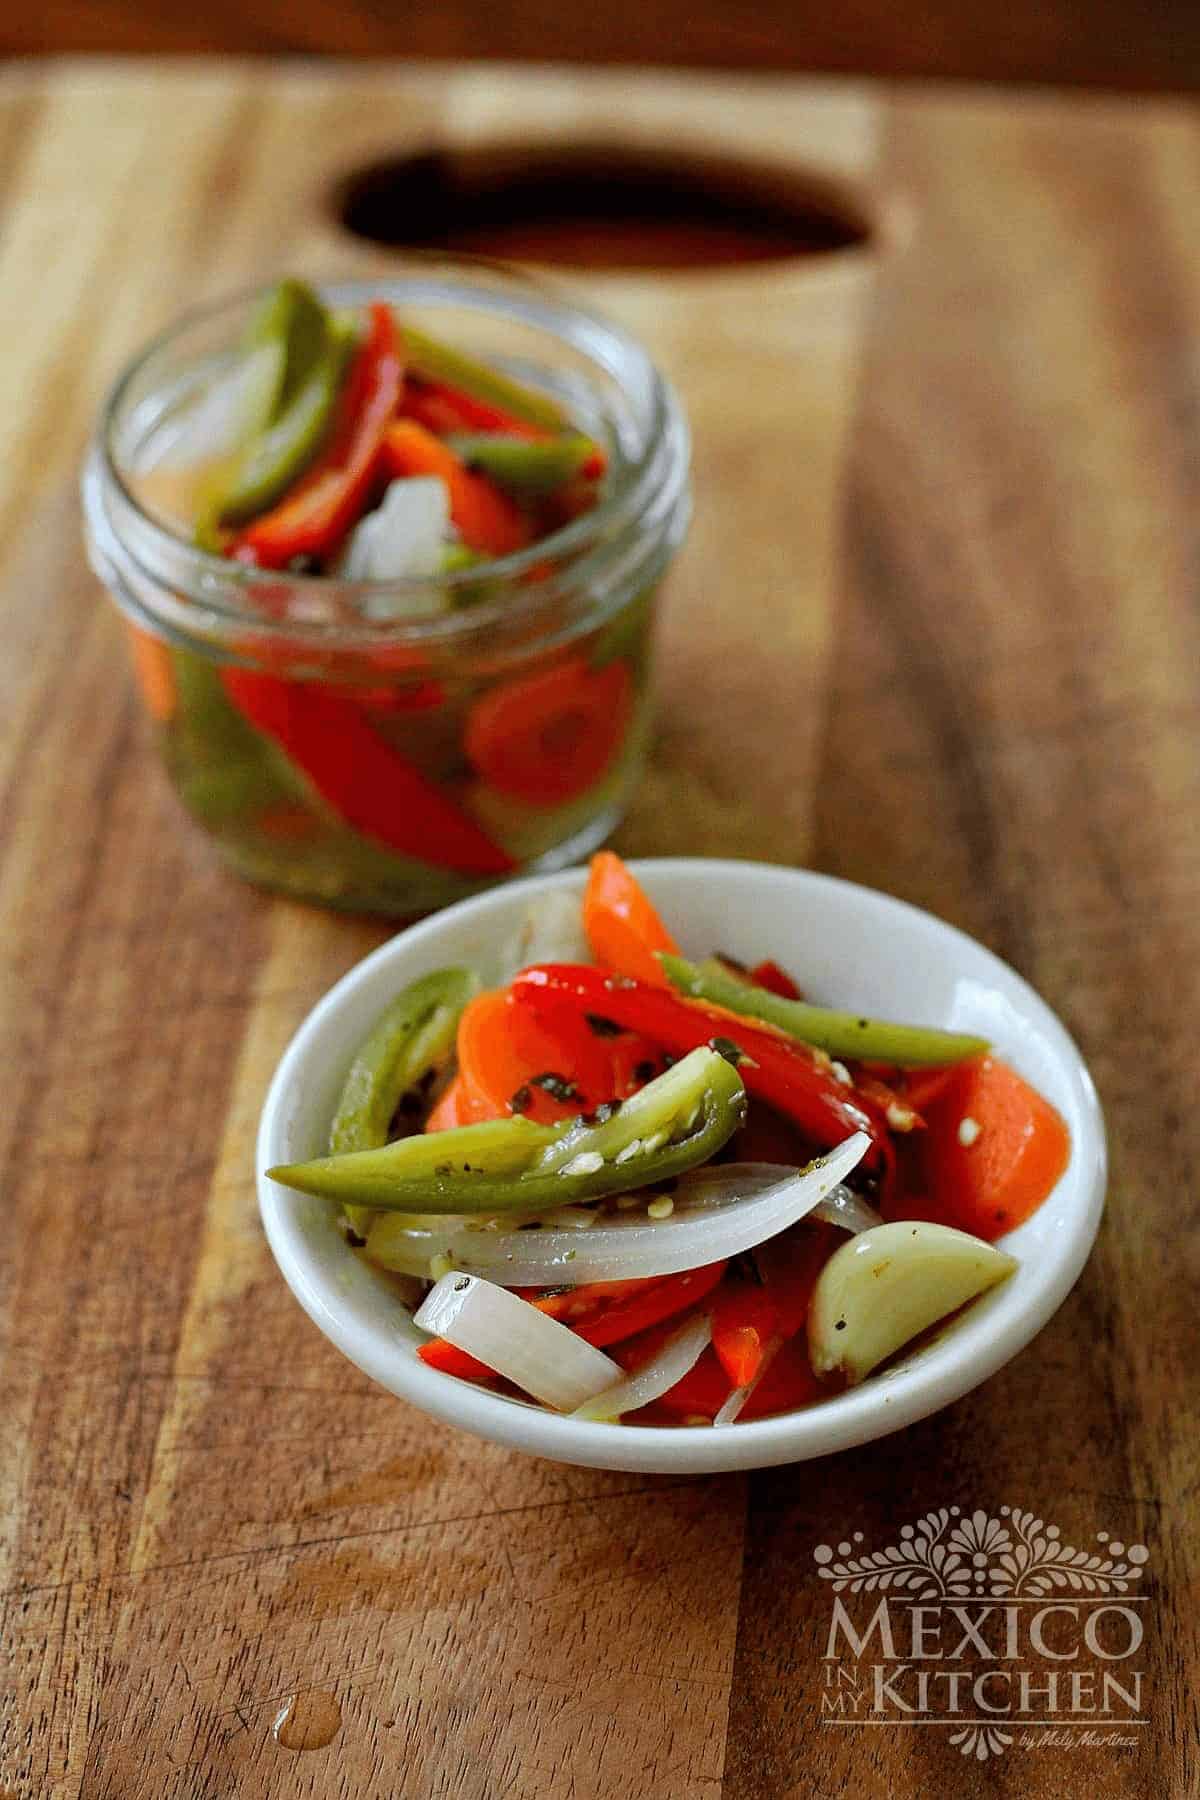 Pickled jalapeños served in a bowl and a jar.